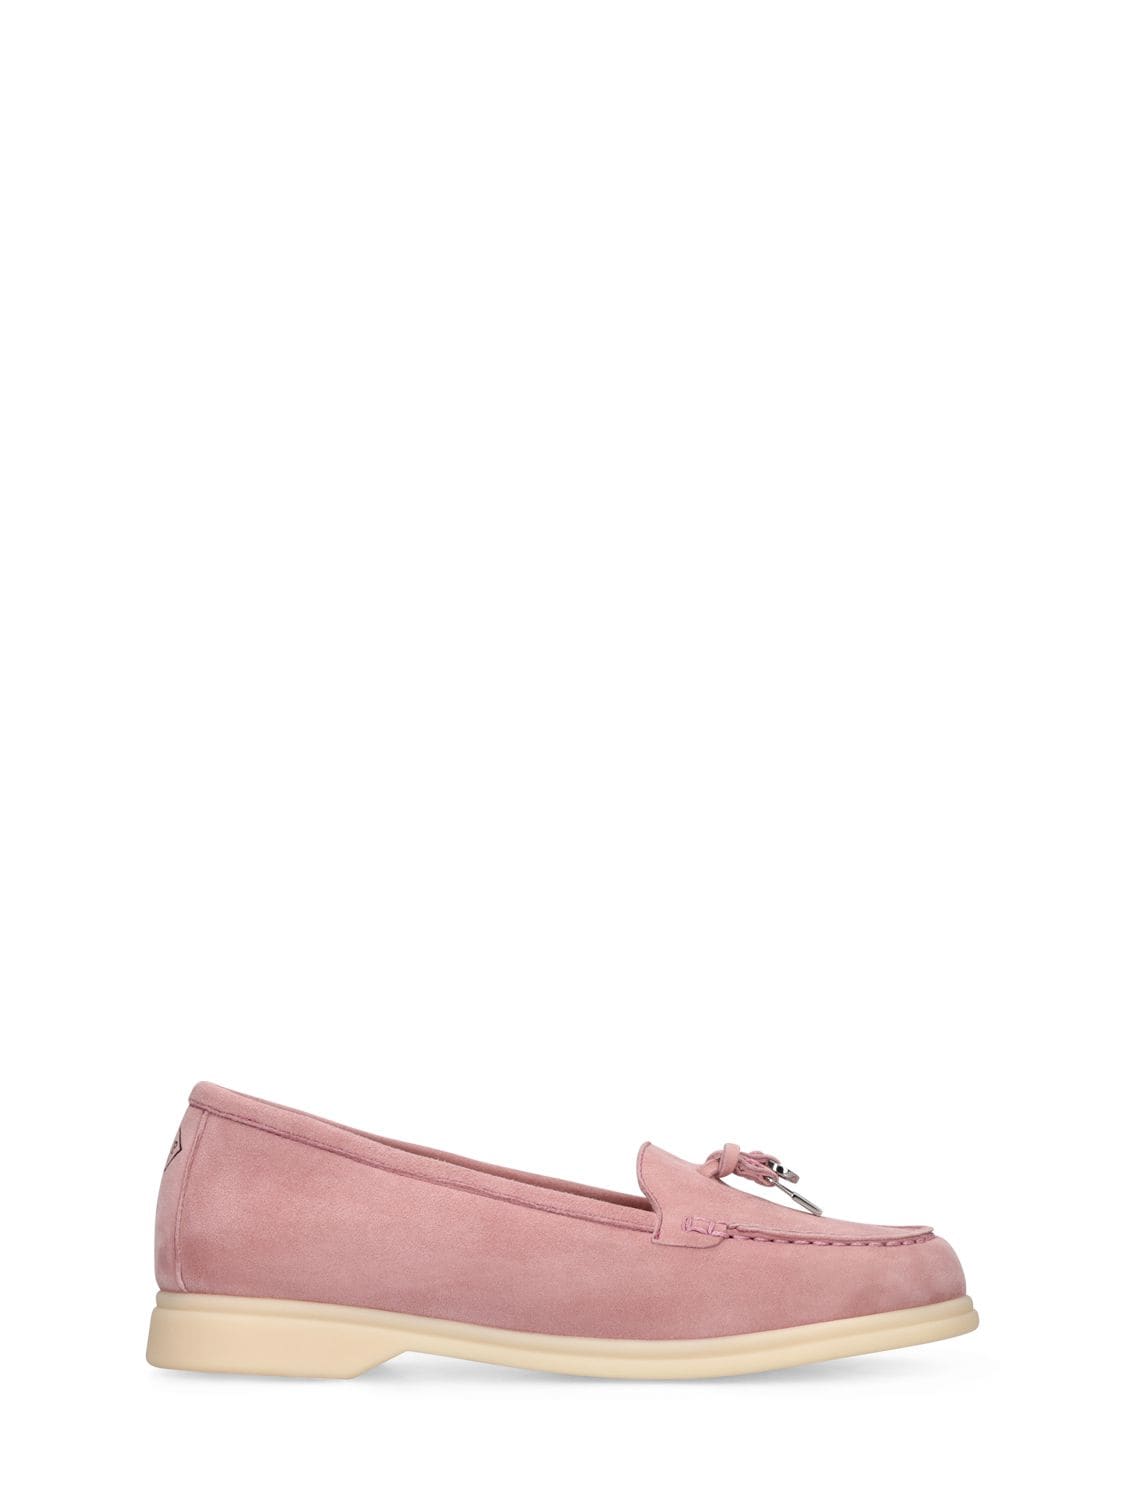 Loro Piana Kids' Suede Loafers W/ Charms In Pink